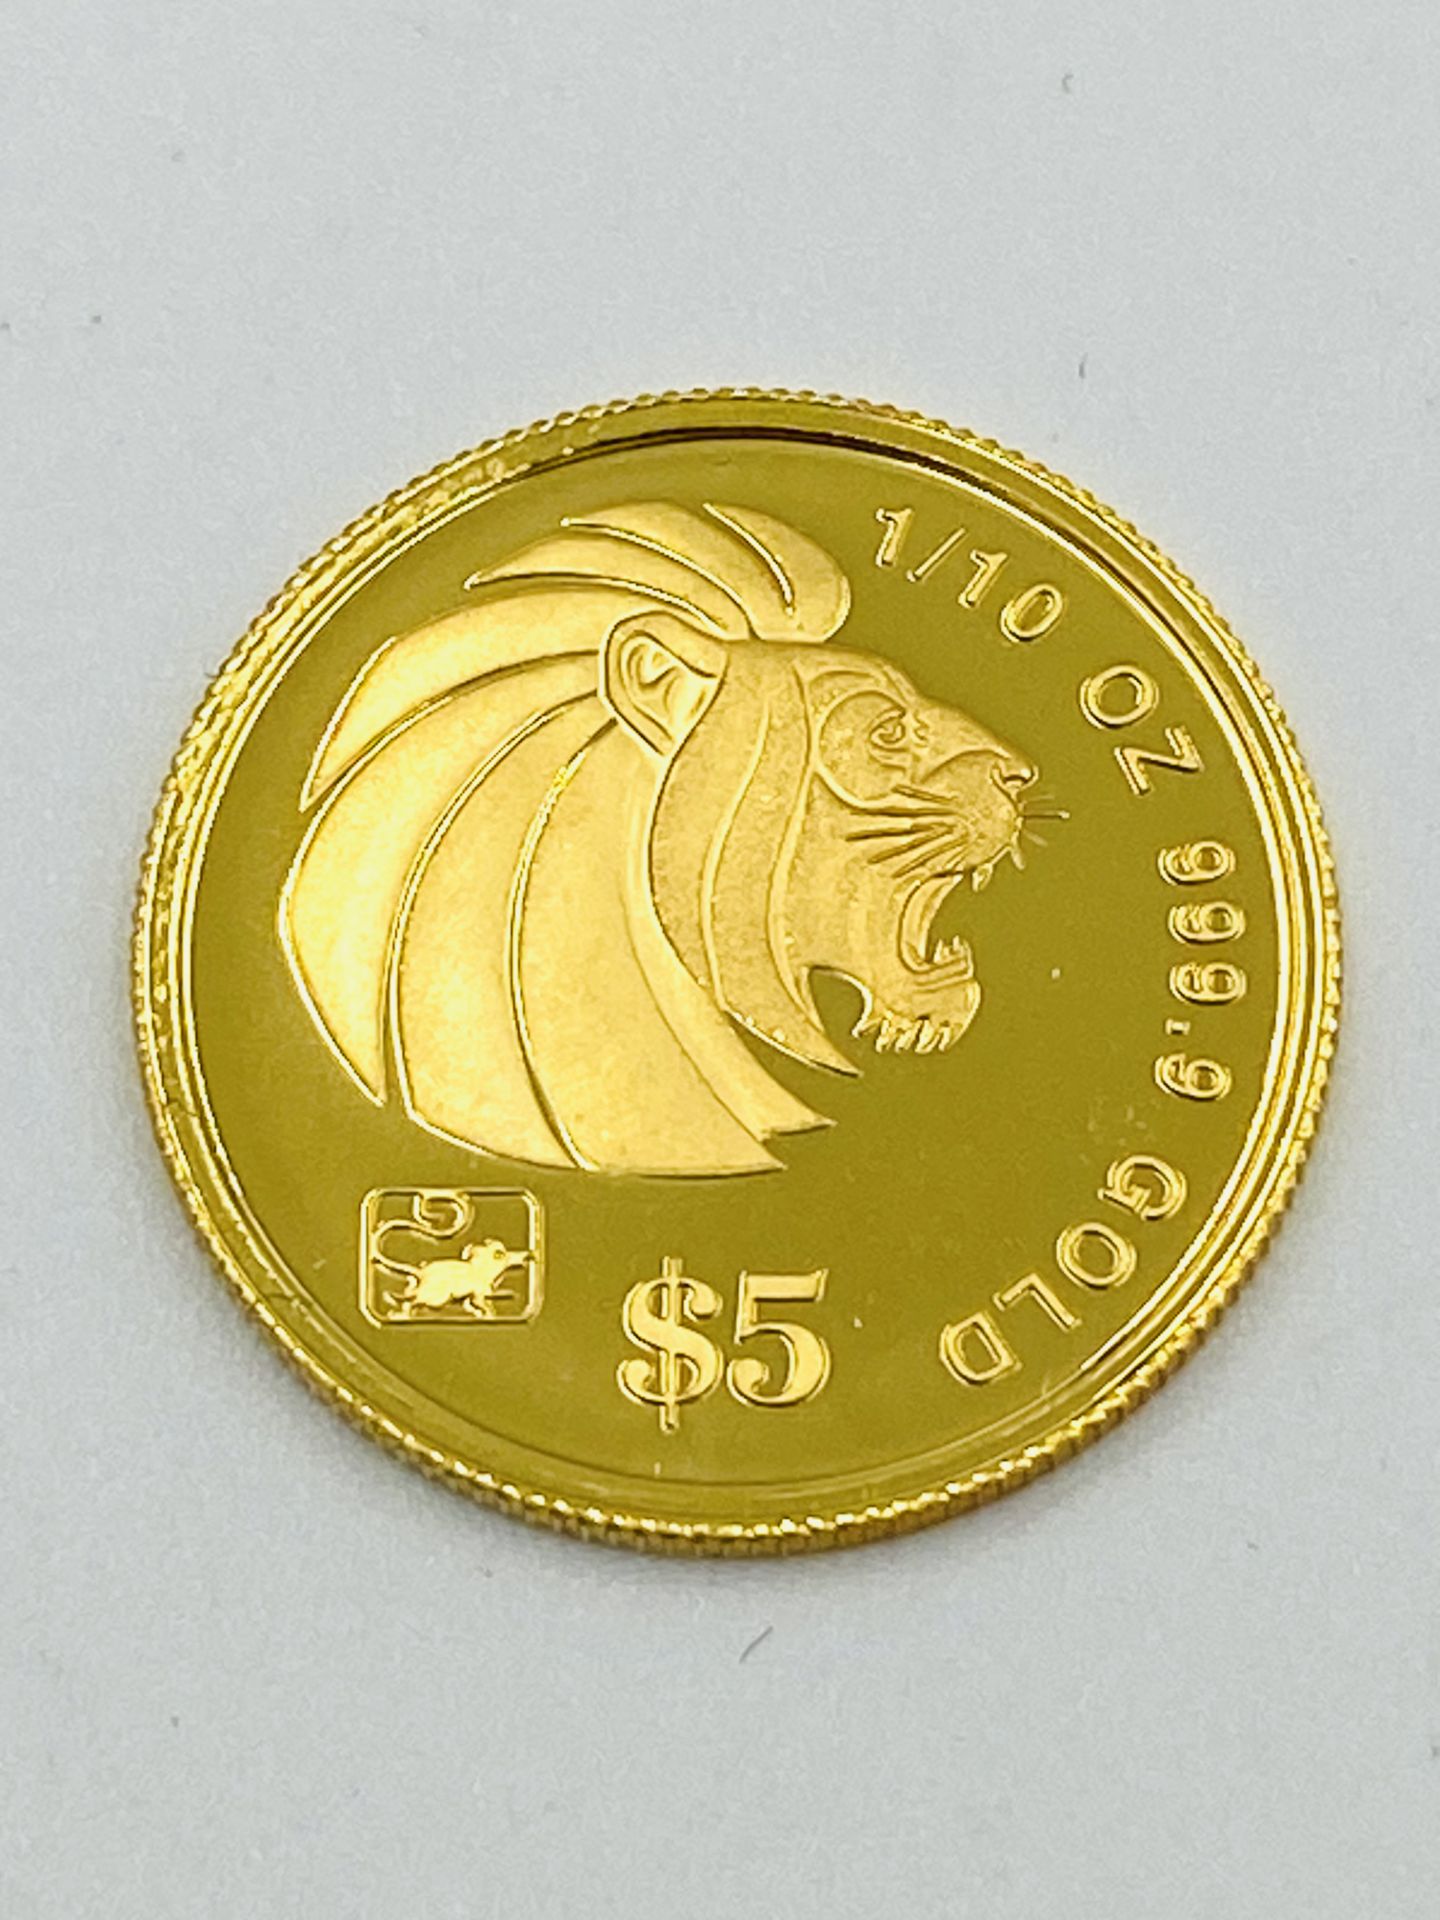 1996 Singapore $5 1/10oz gold coin - Image 2 of 3